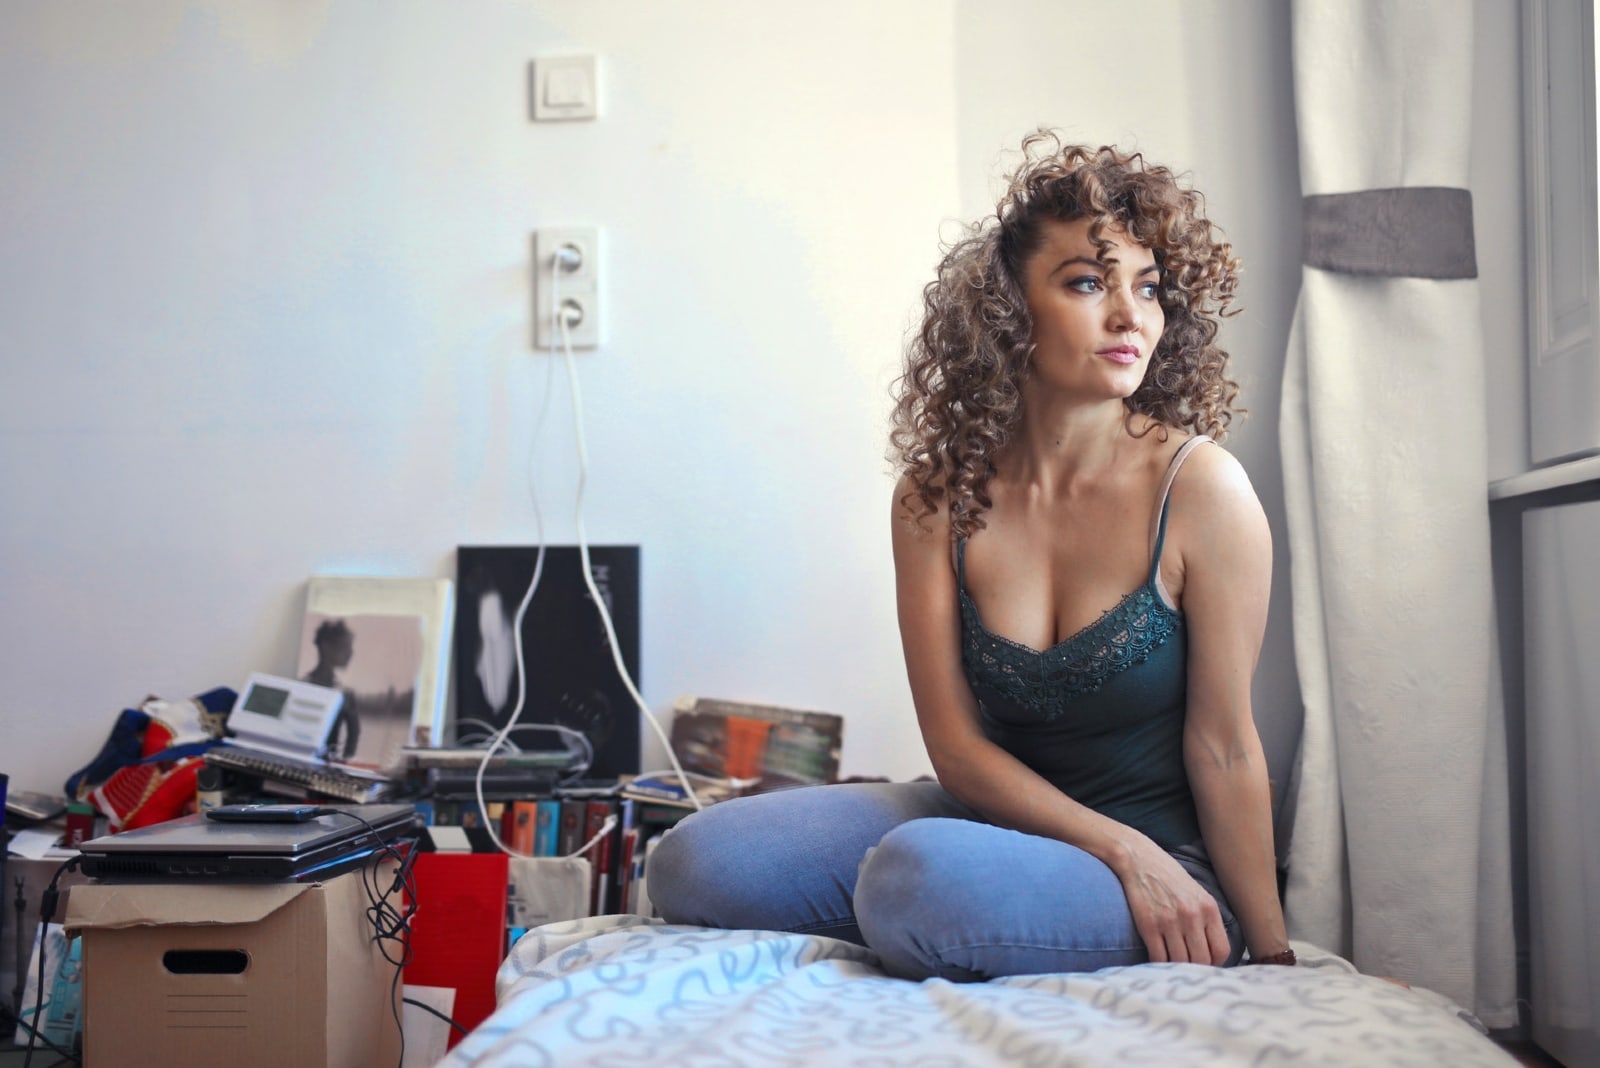 pensive woman with curly hair sitting on bed